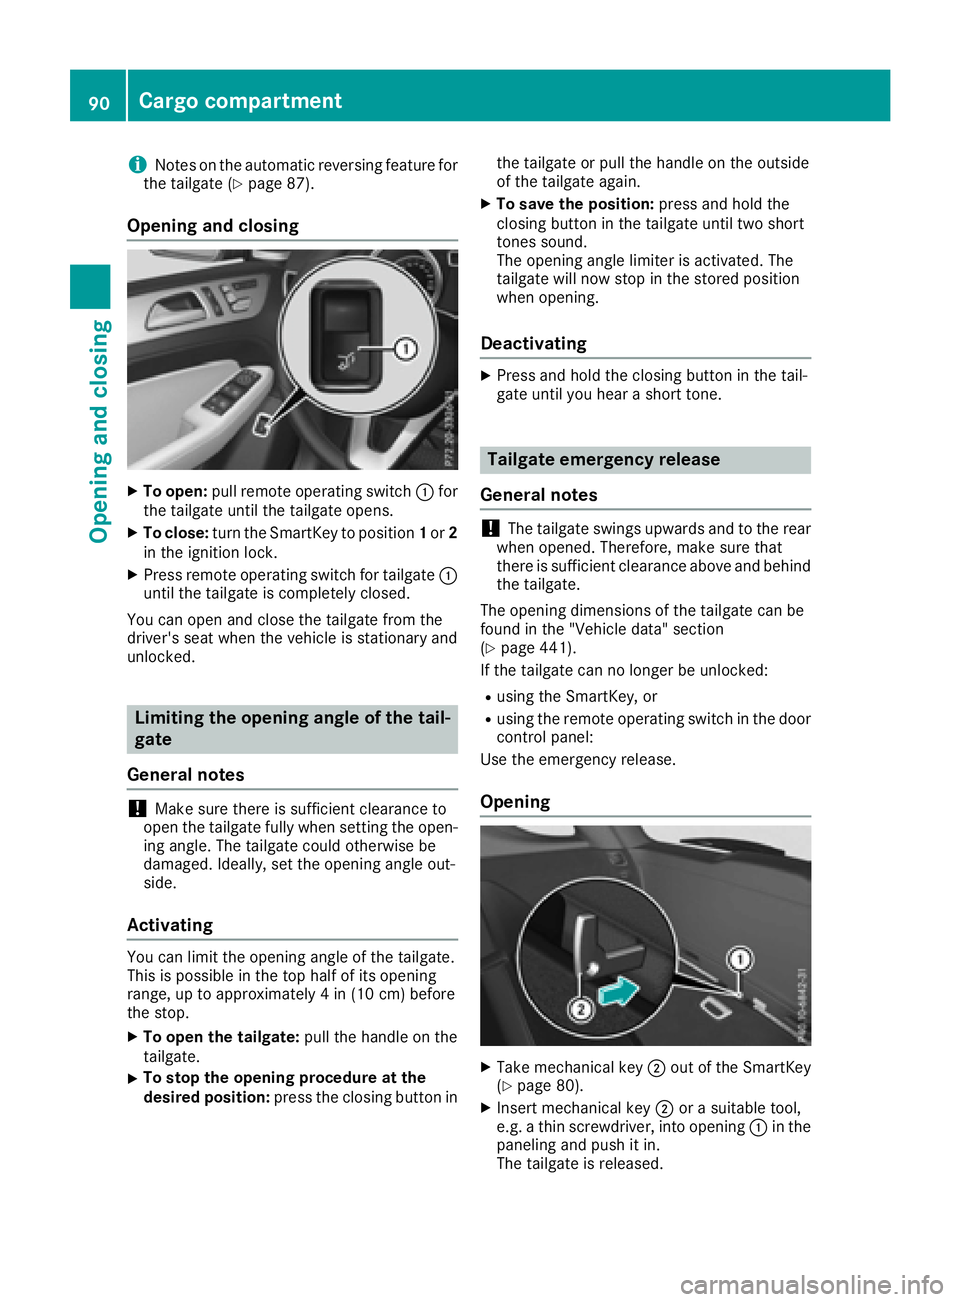 MERCEDES-BENZ GLE-CLASS SUV 2016  Owners Manual iNotes on the automatic reversing feature for
the tailgate (Ypage 87).
Opening and closing
XTo open: pull remote operating switch :for
the tailgate until the tailgate opens.
XTo close: turn the SmartK